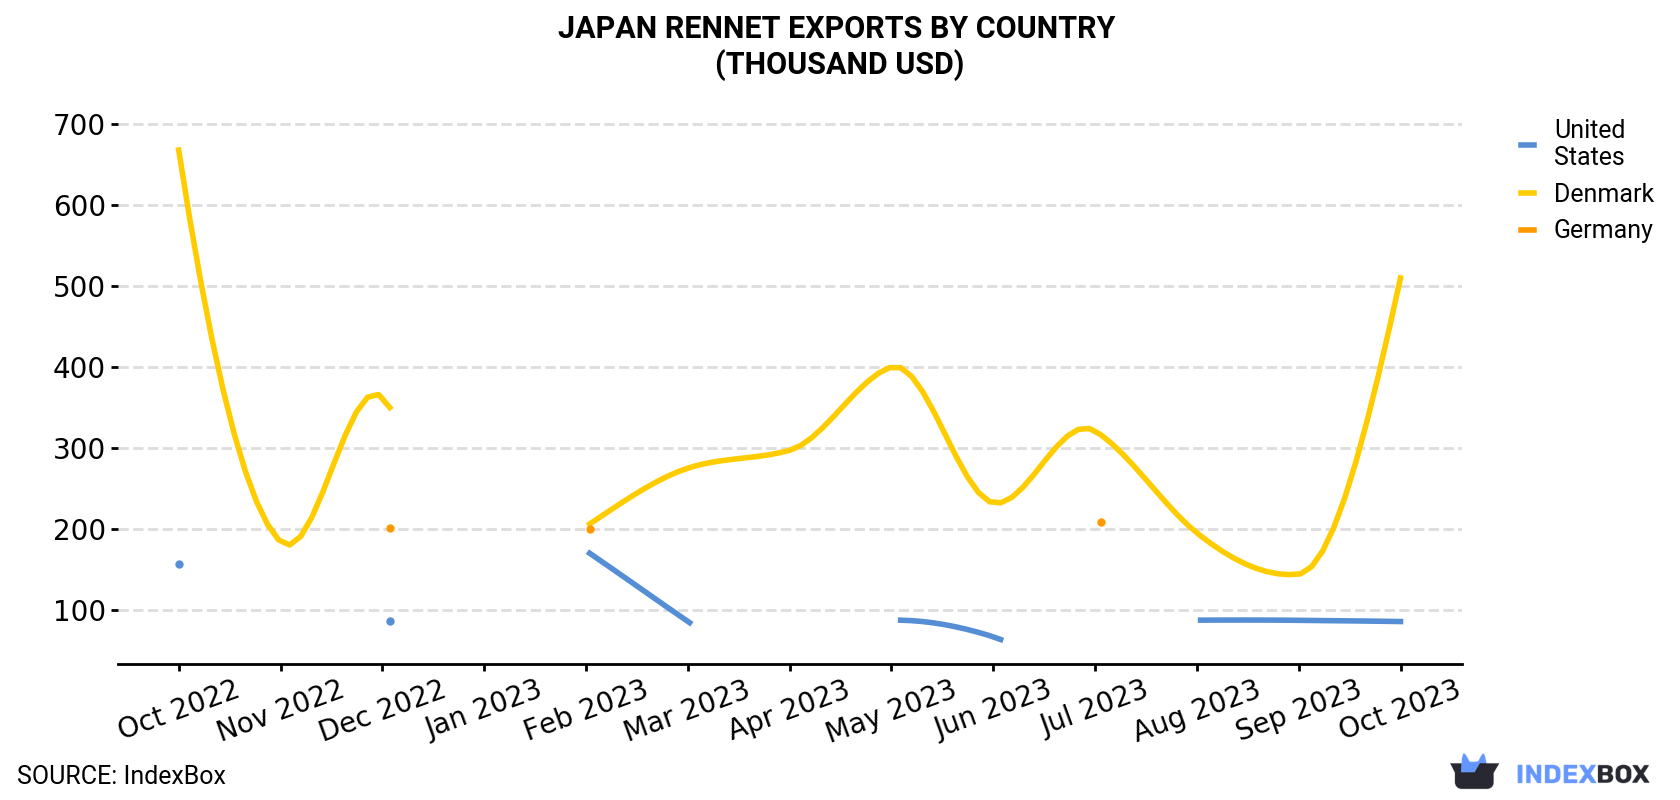 Japan Rennet Exports By Country (Thousand USD)